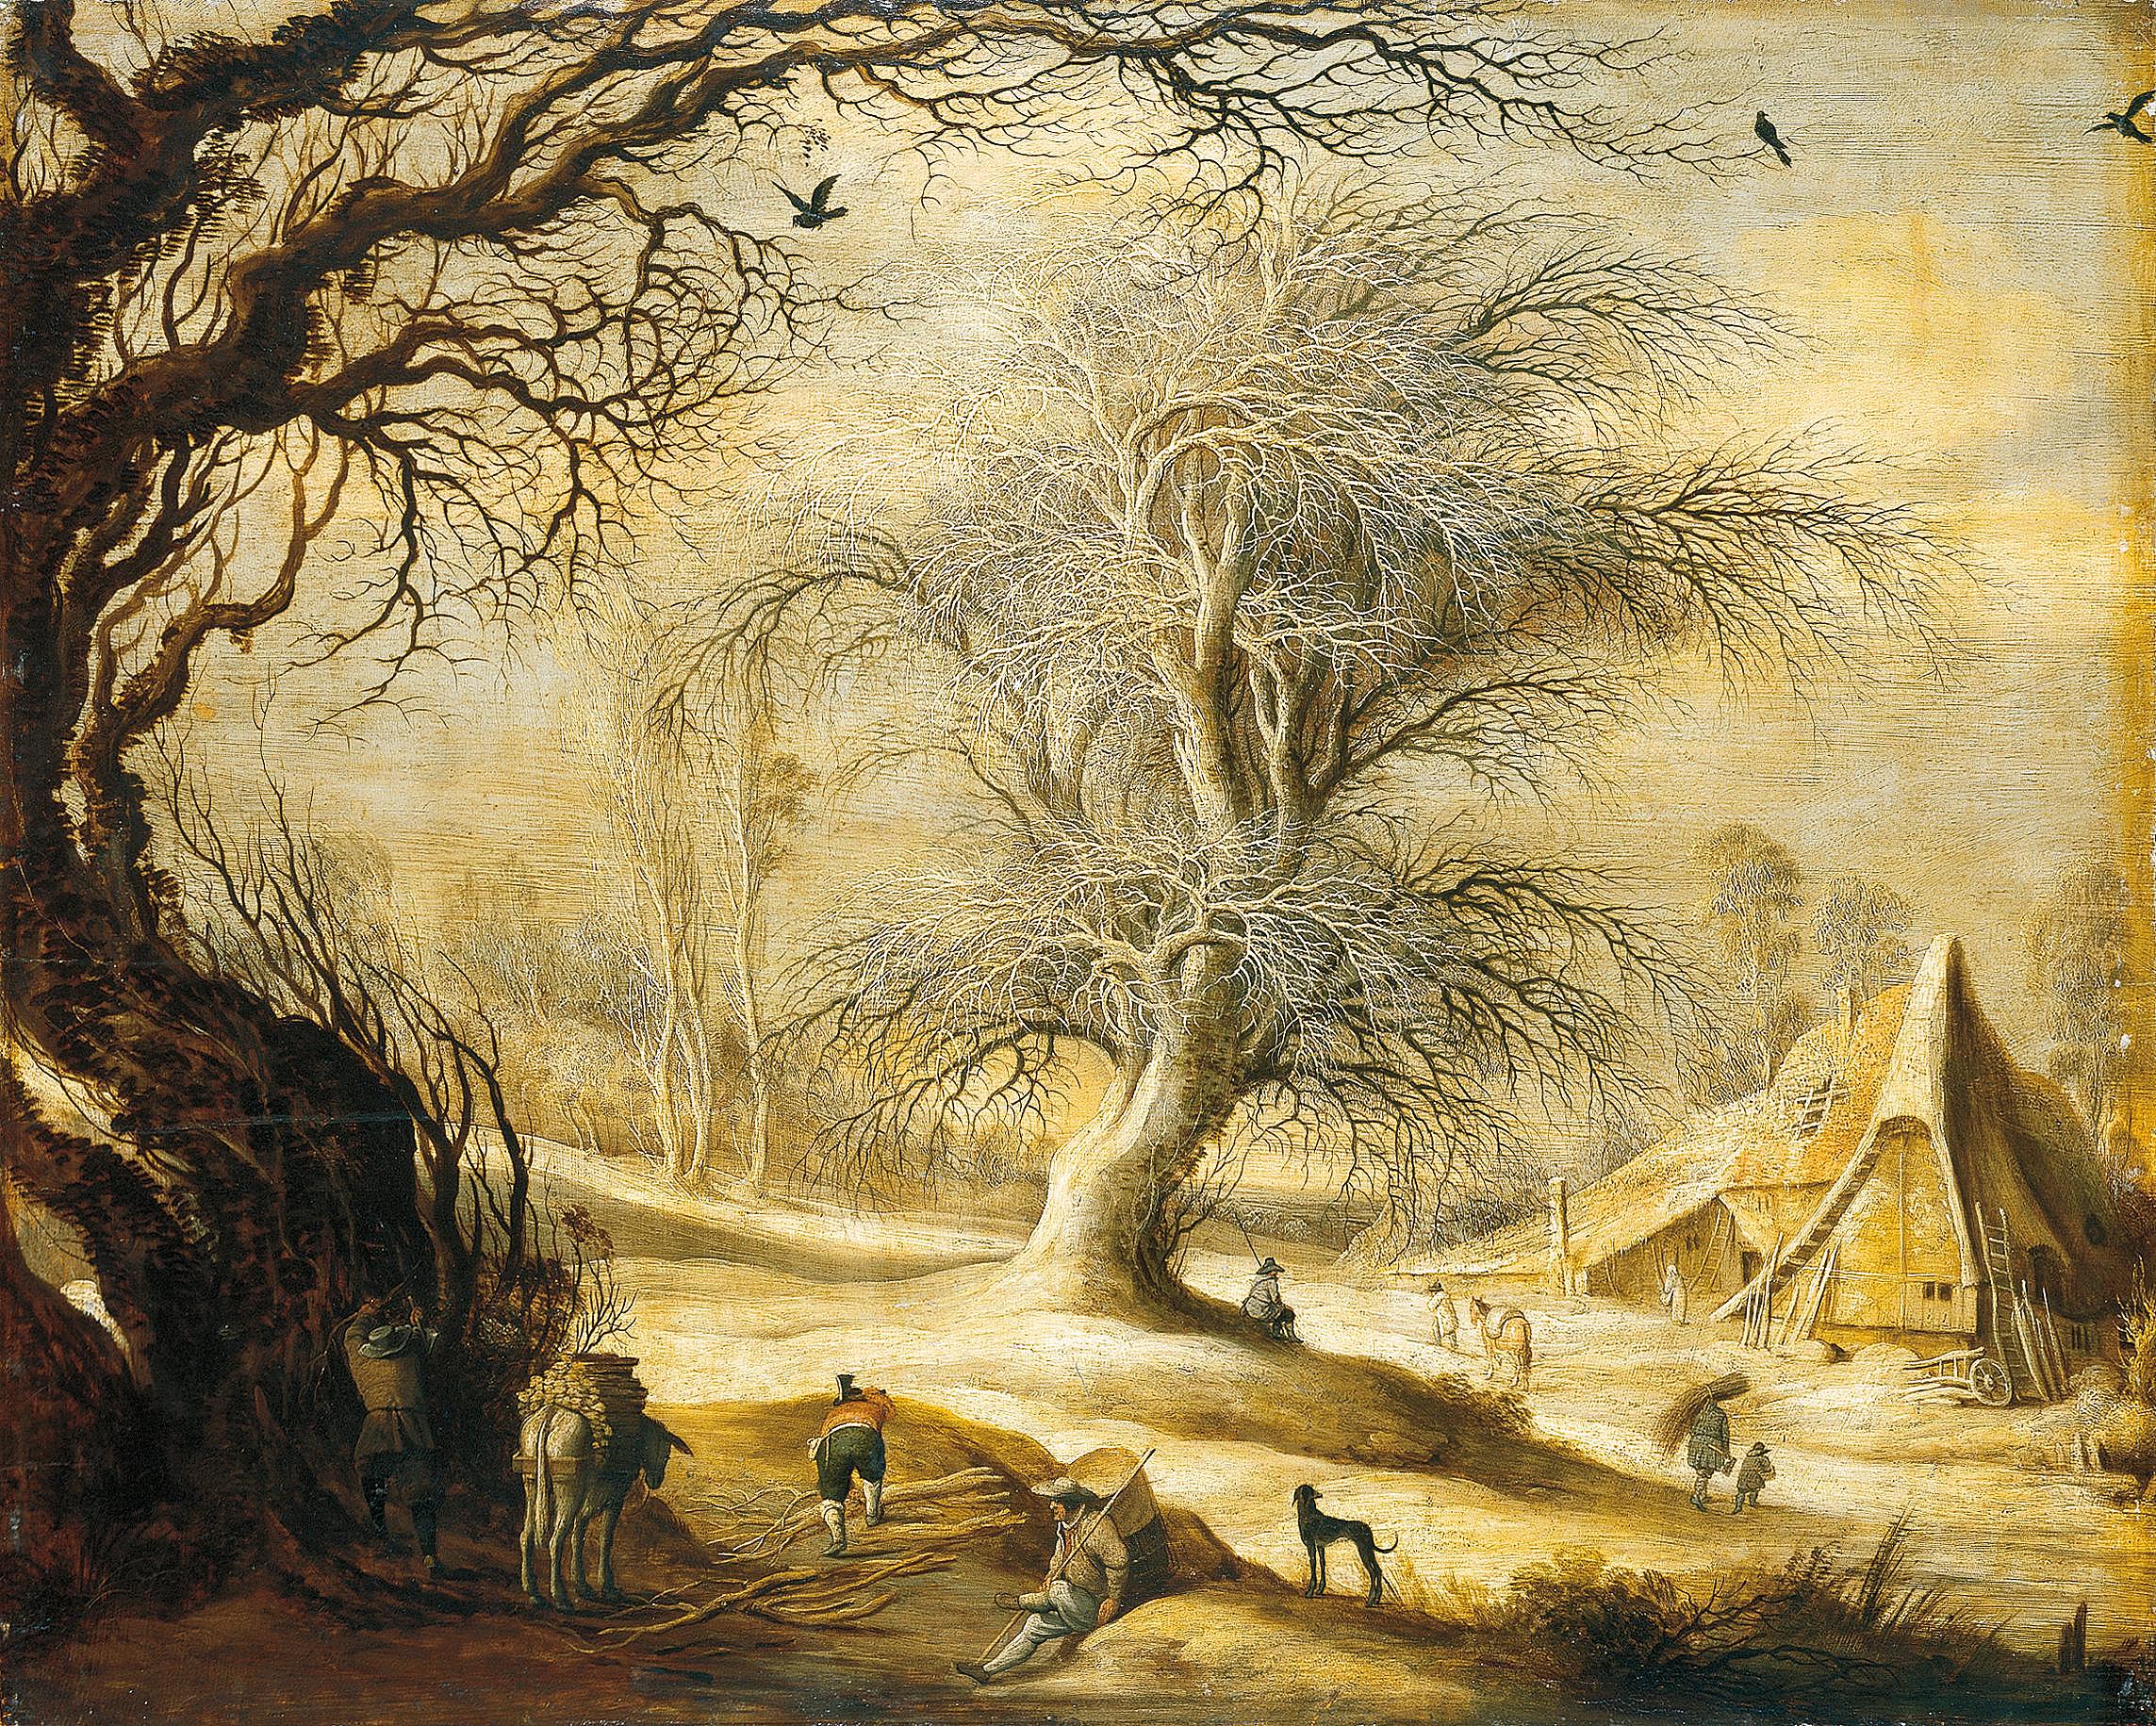 Gijsbrecht Leytens - Winter Landscape with Woodcutters